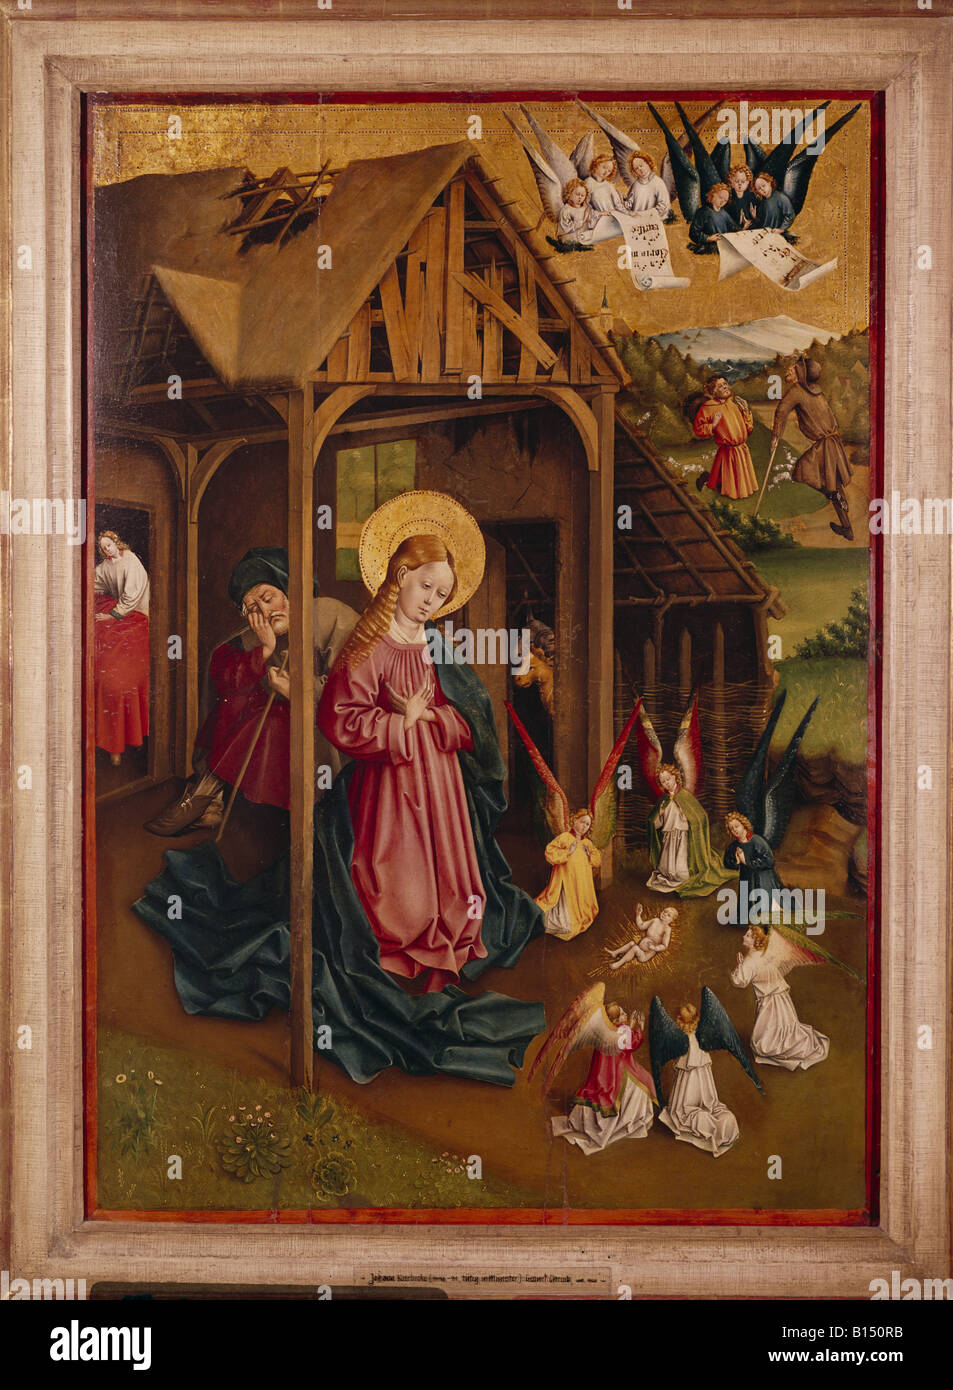 fine arts, Koerbecke, Jan, (1410 - 1491), painting, birth of Christ, 1457, Germanic National museum, Nuremberg, Germany, Artist's Copyright has not to be cleared Stock Photo